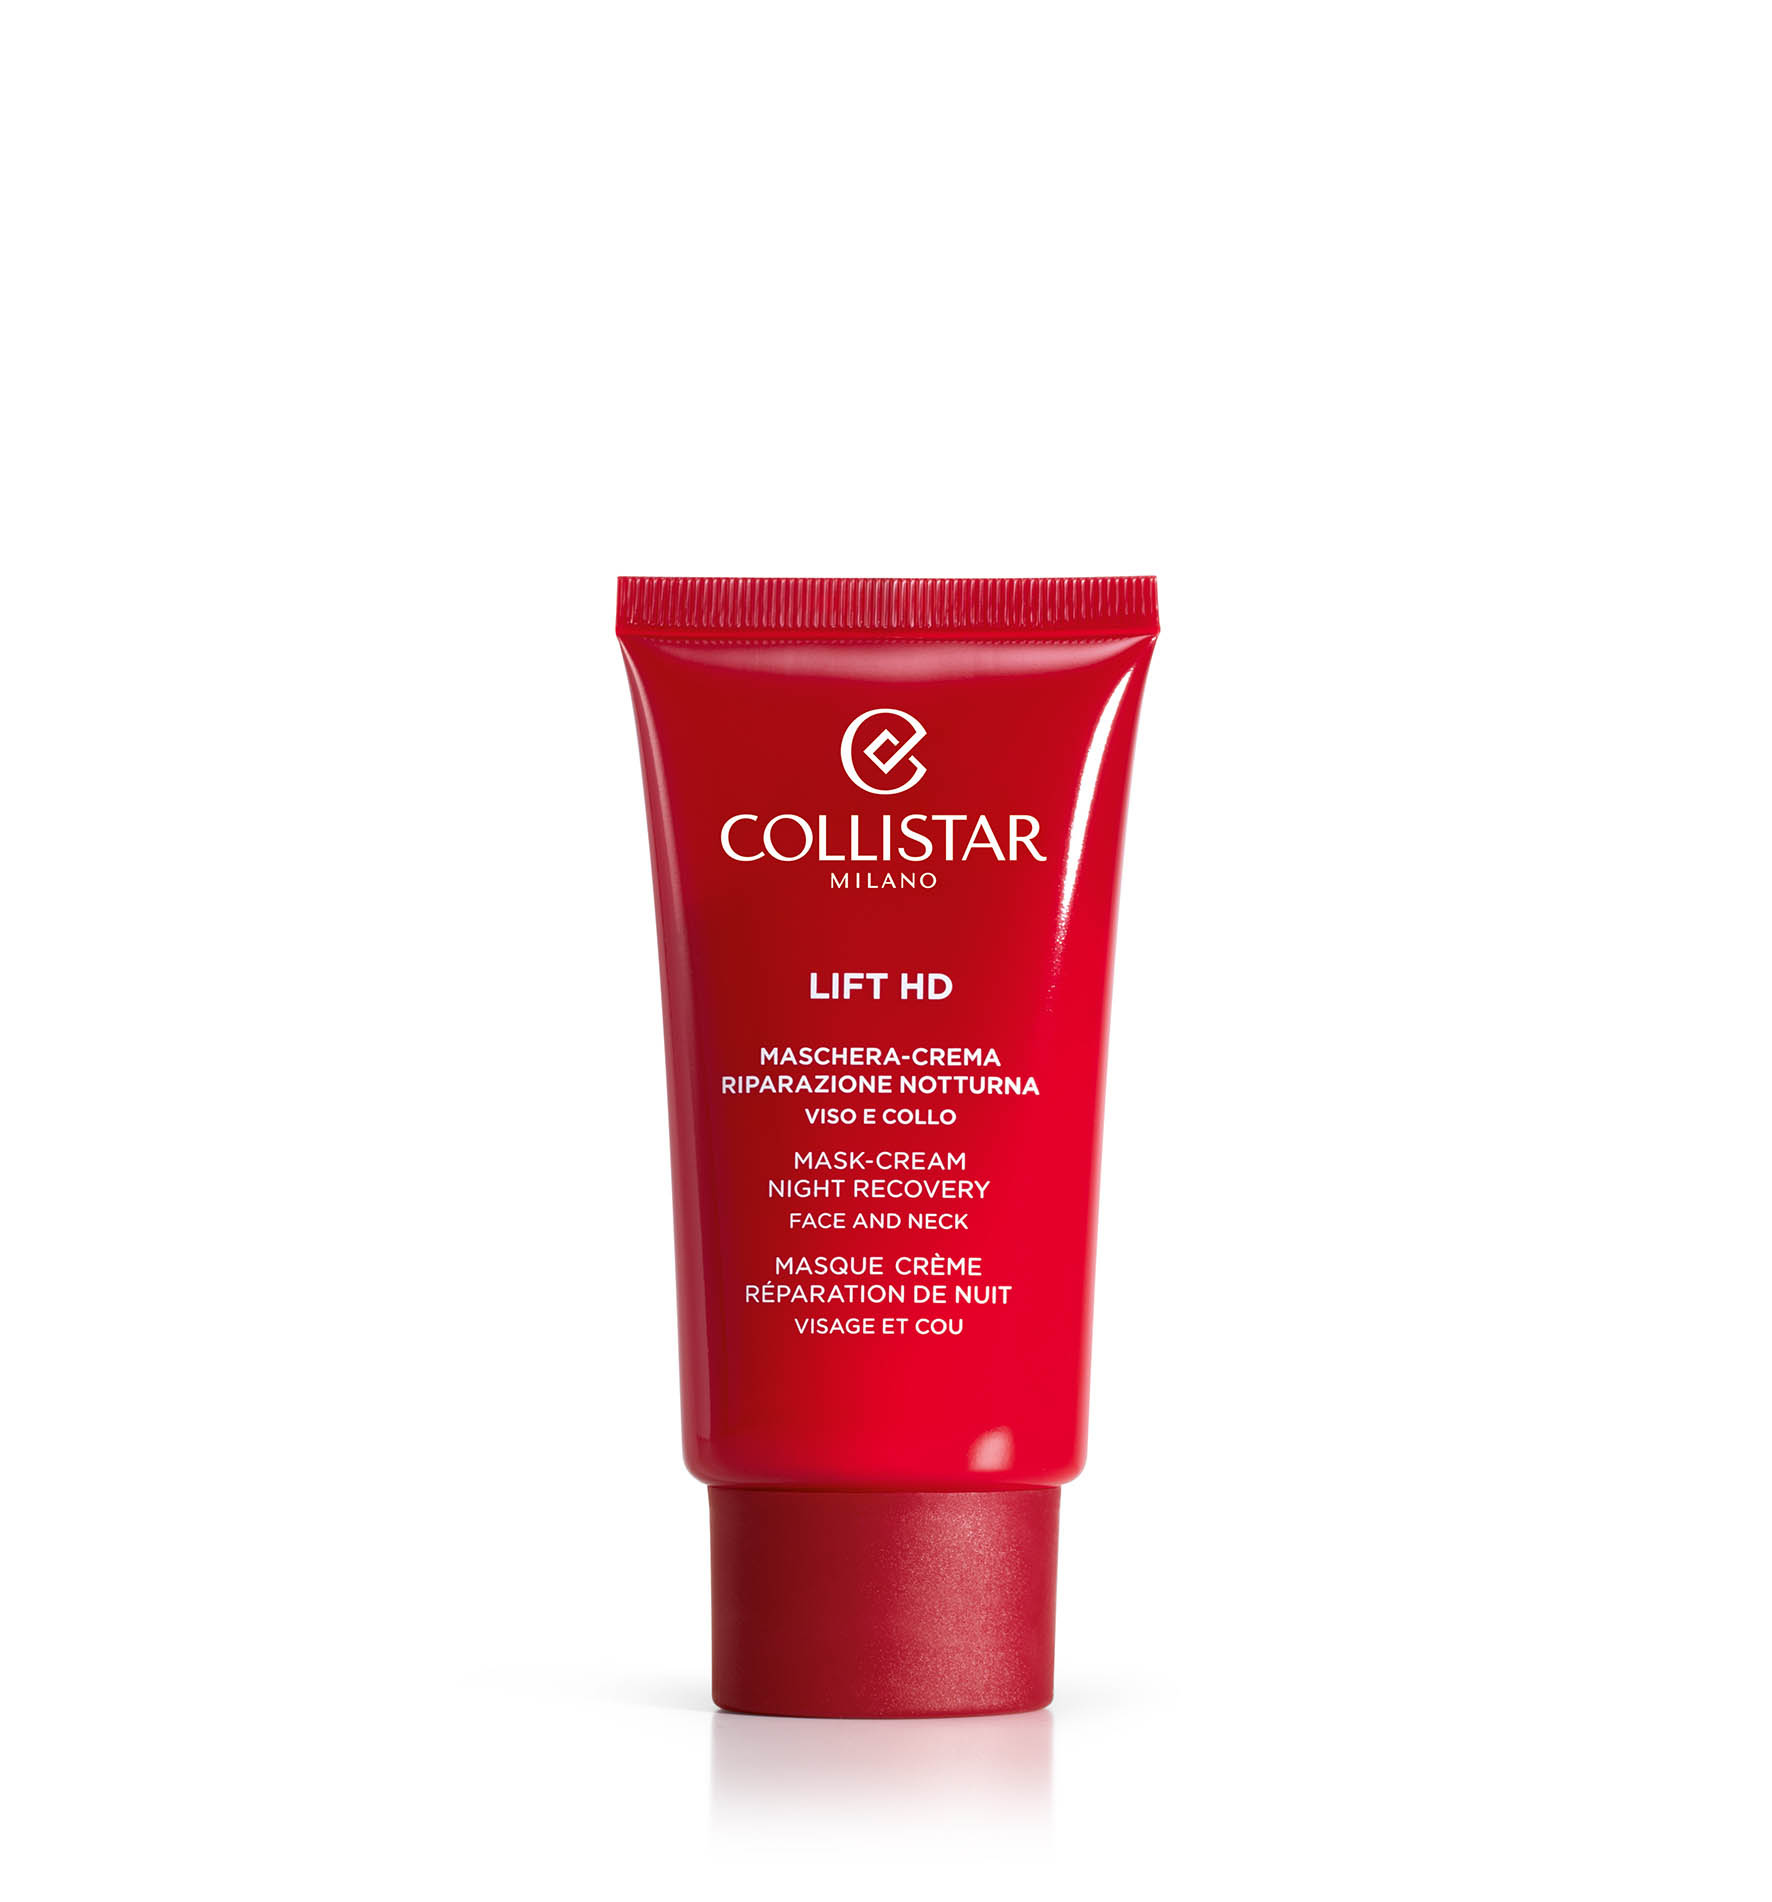 MASK-CREAM NIGHT RECOVERY FACE AND NECK - Anti-age | Collistar - Shop Online Ufficiale